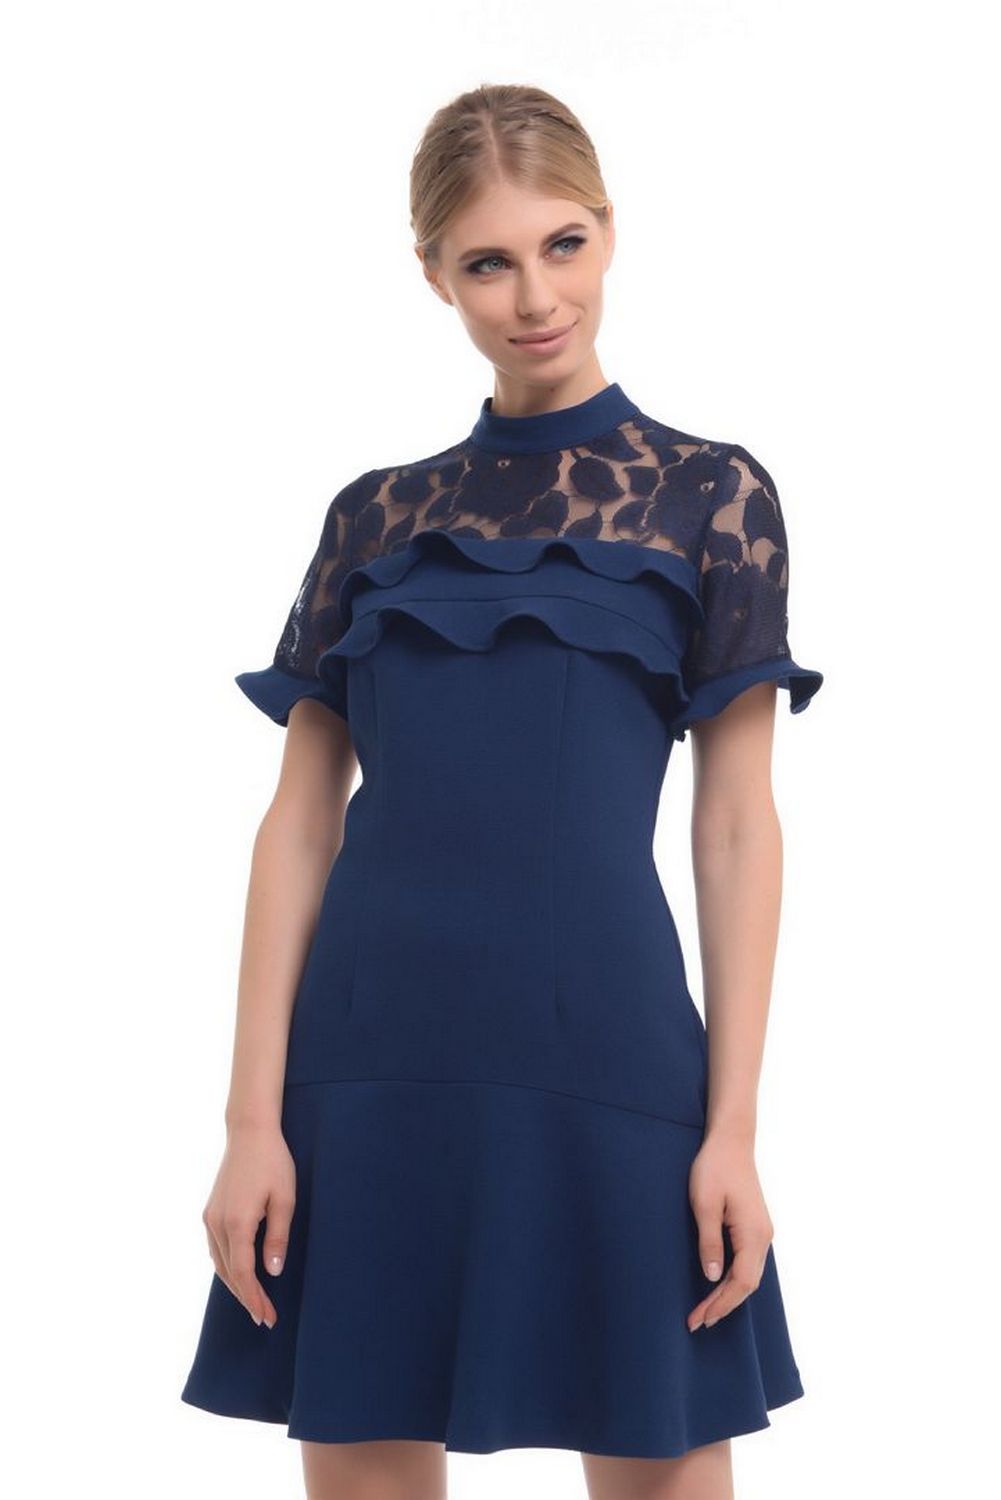 Buy Women Blue Guipure Lace Elegant dress, Above the knee short sleeve party dress by Arefeva